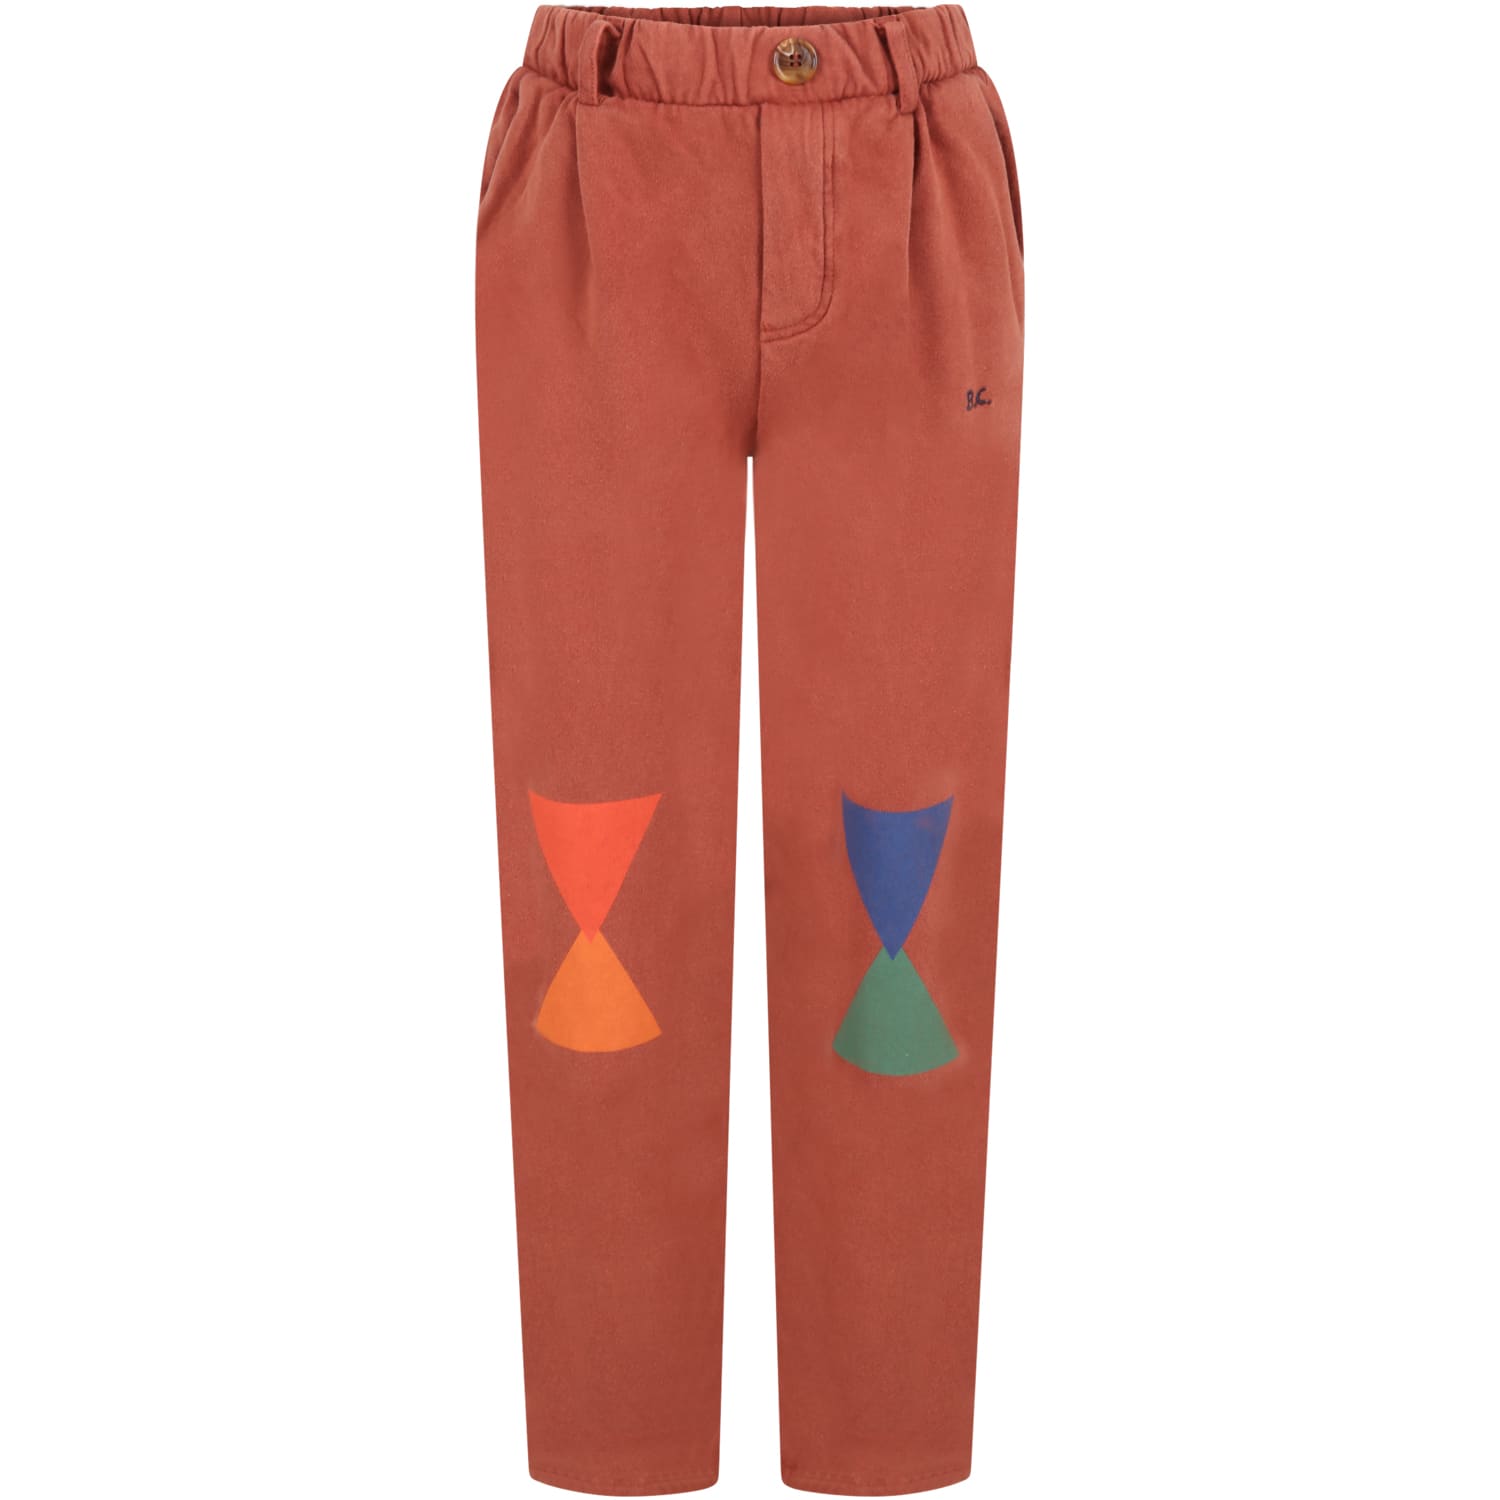 Bobo Choses Brown Sweatpants For Kids With Geometric Figures